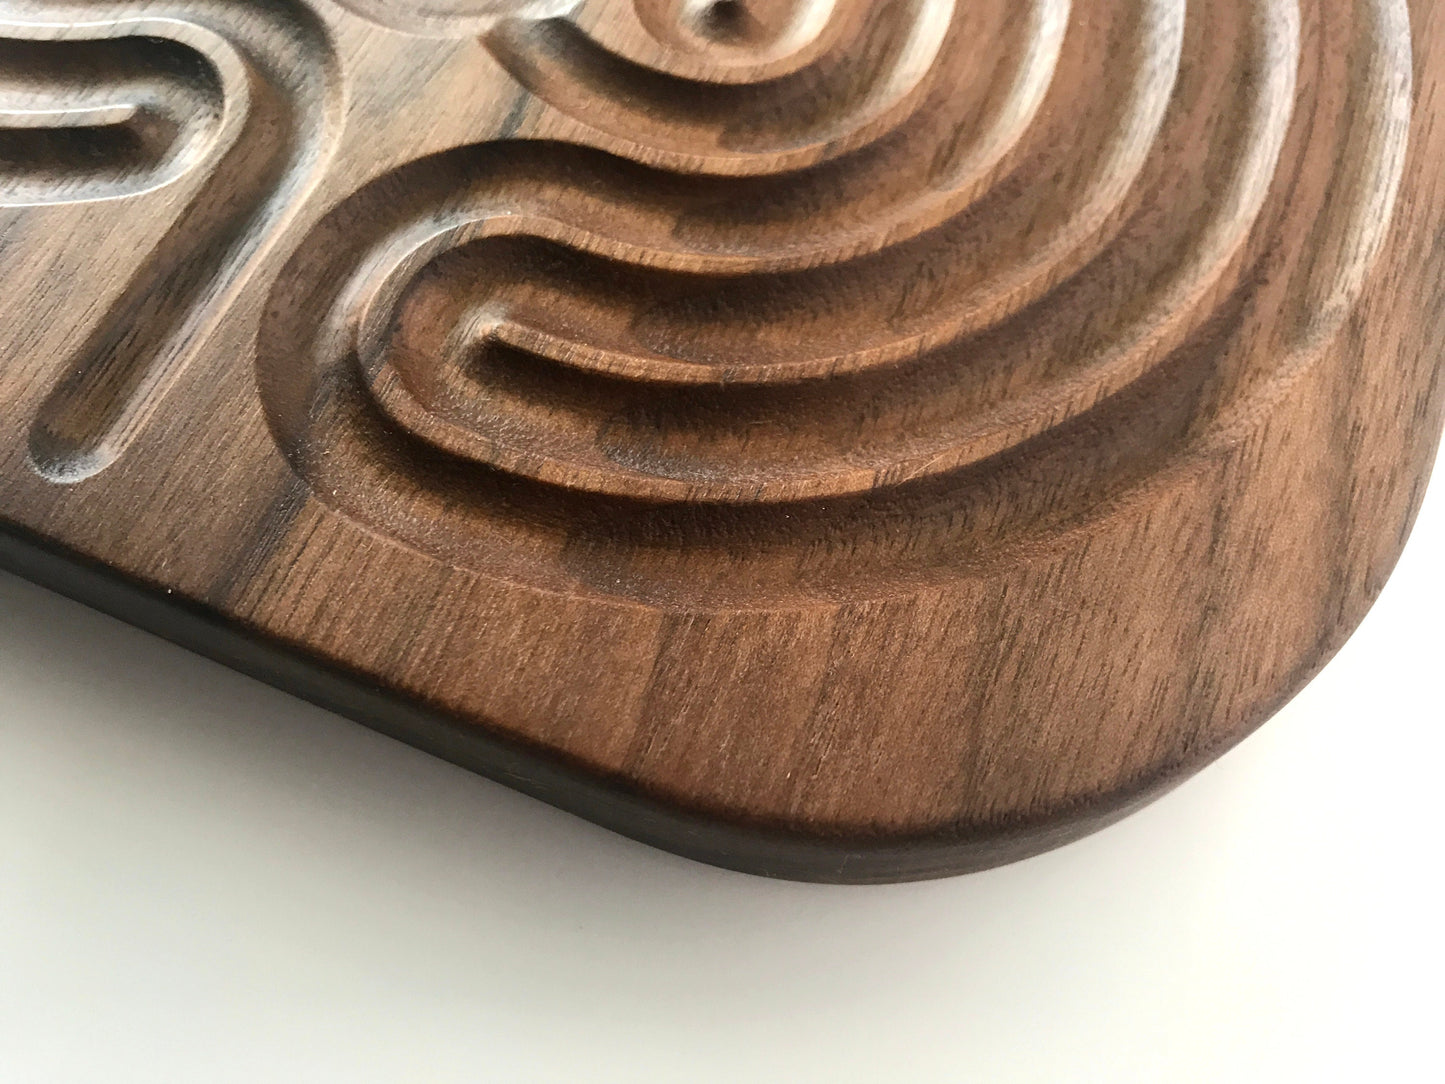 Medium Classical Finger Labyrinth, Wide Grooves, Walnut Wood, 7.5" by 6.5"